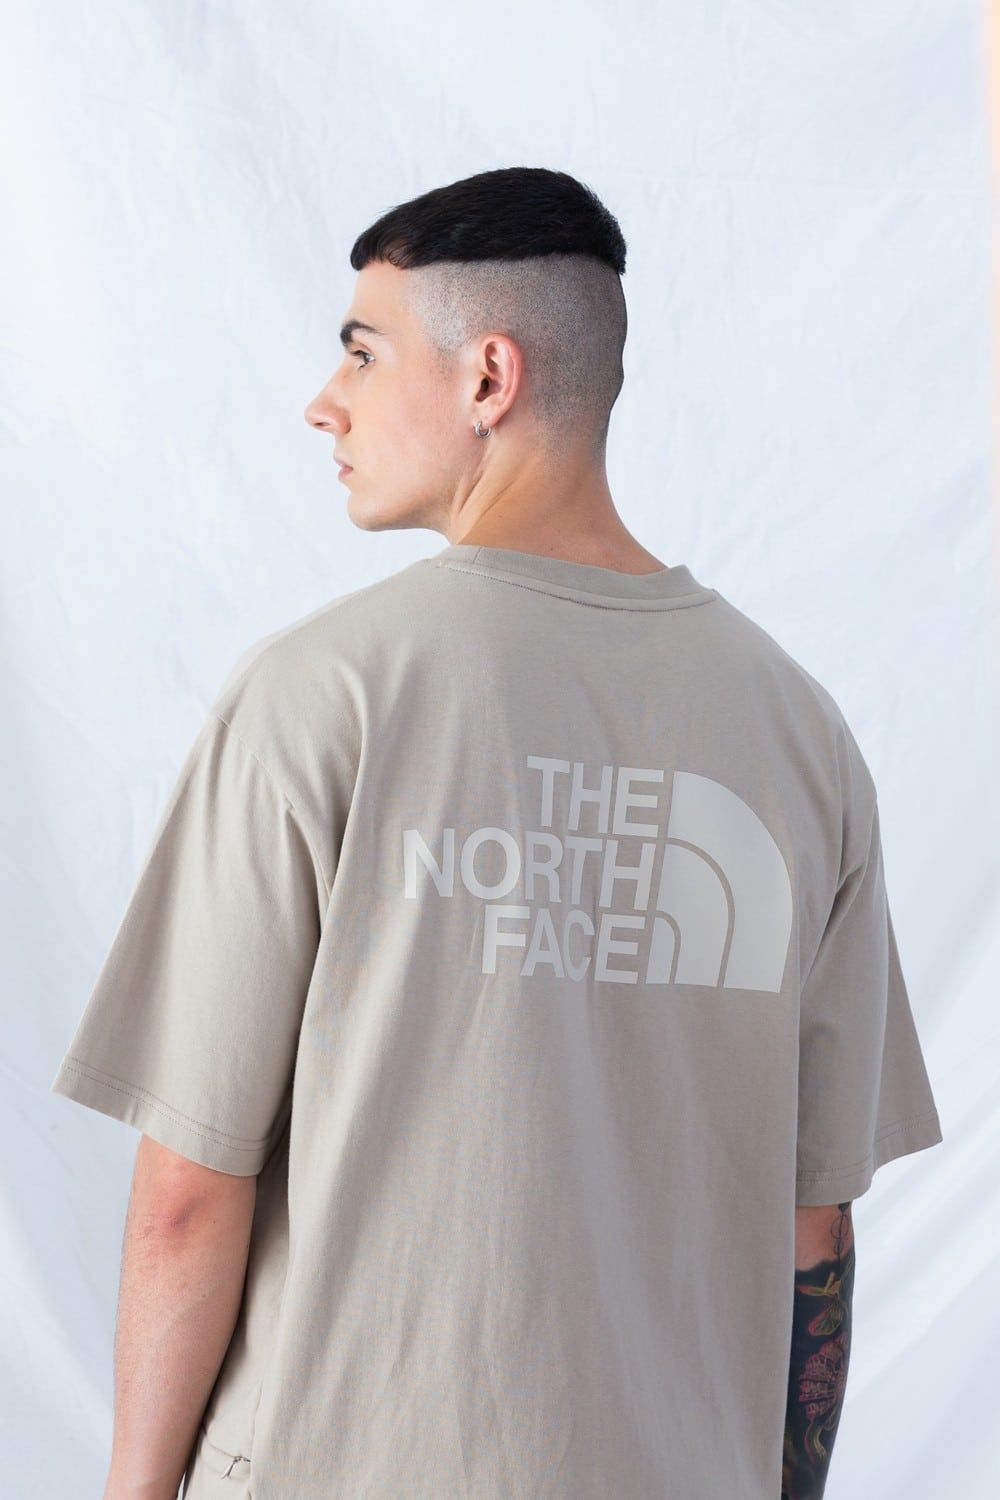 The North Face FW21